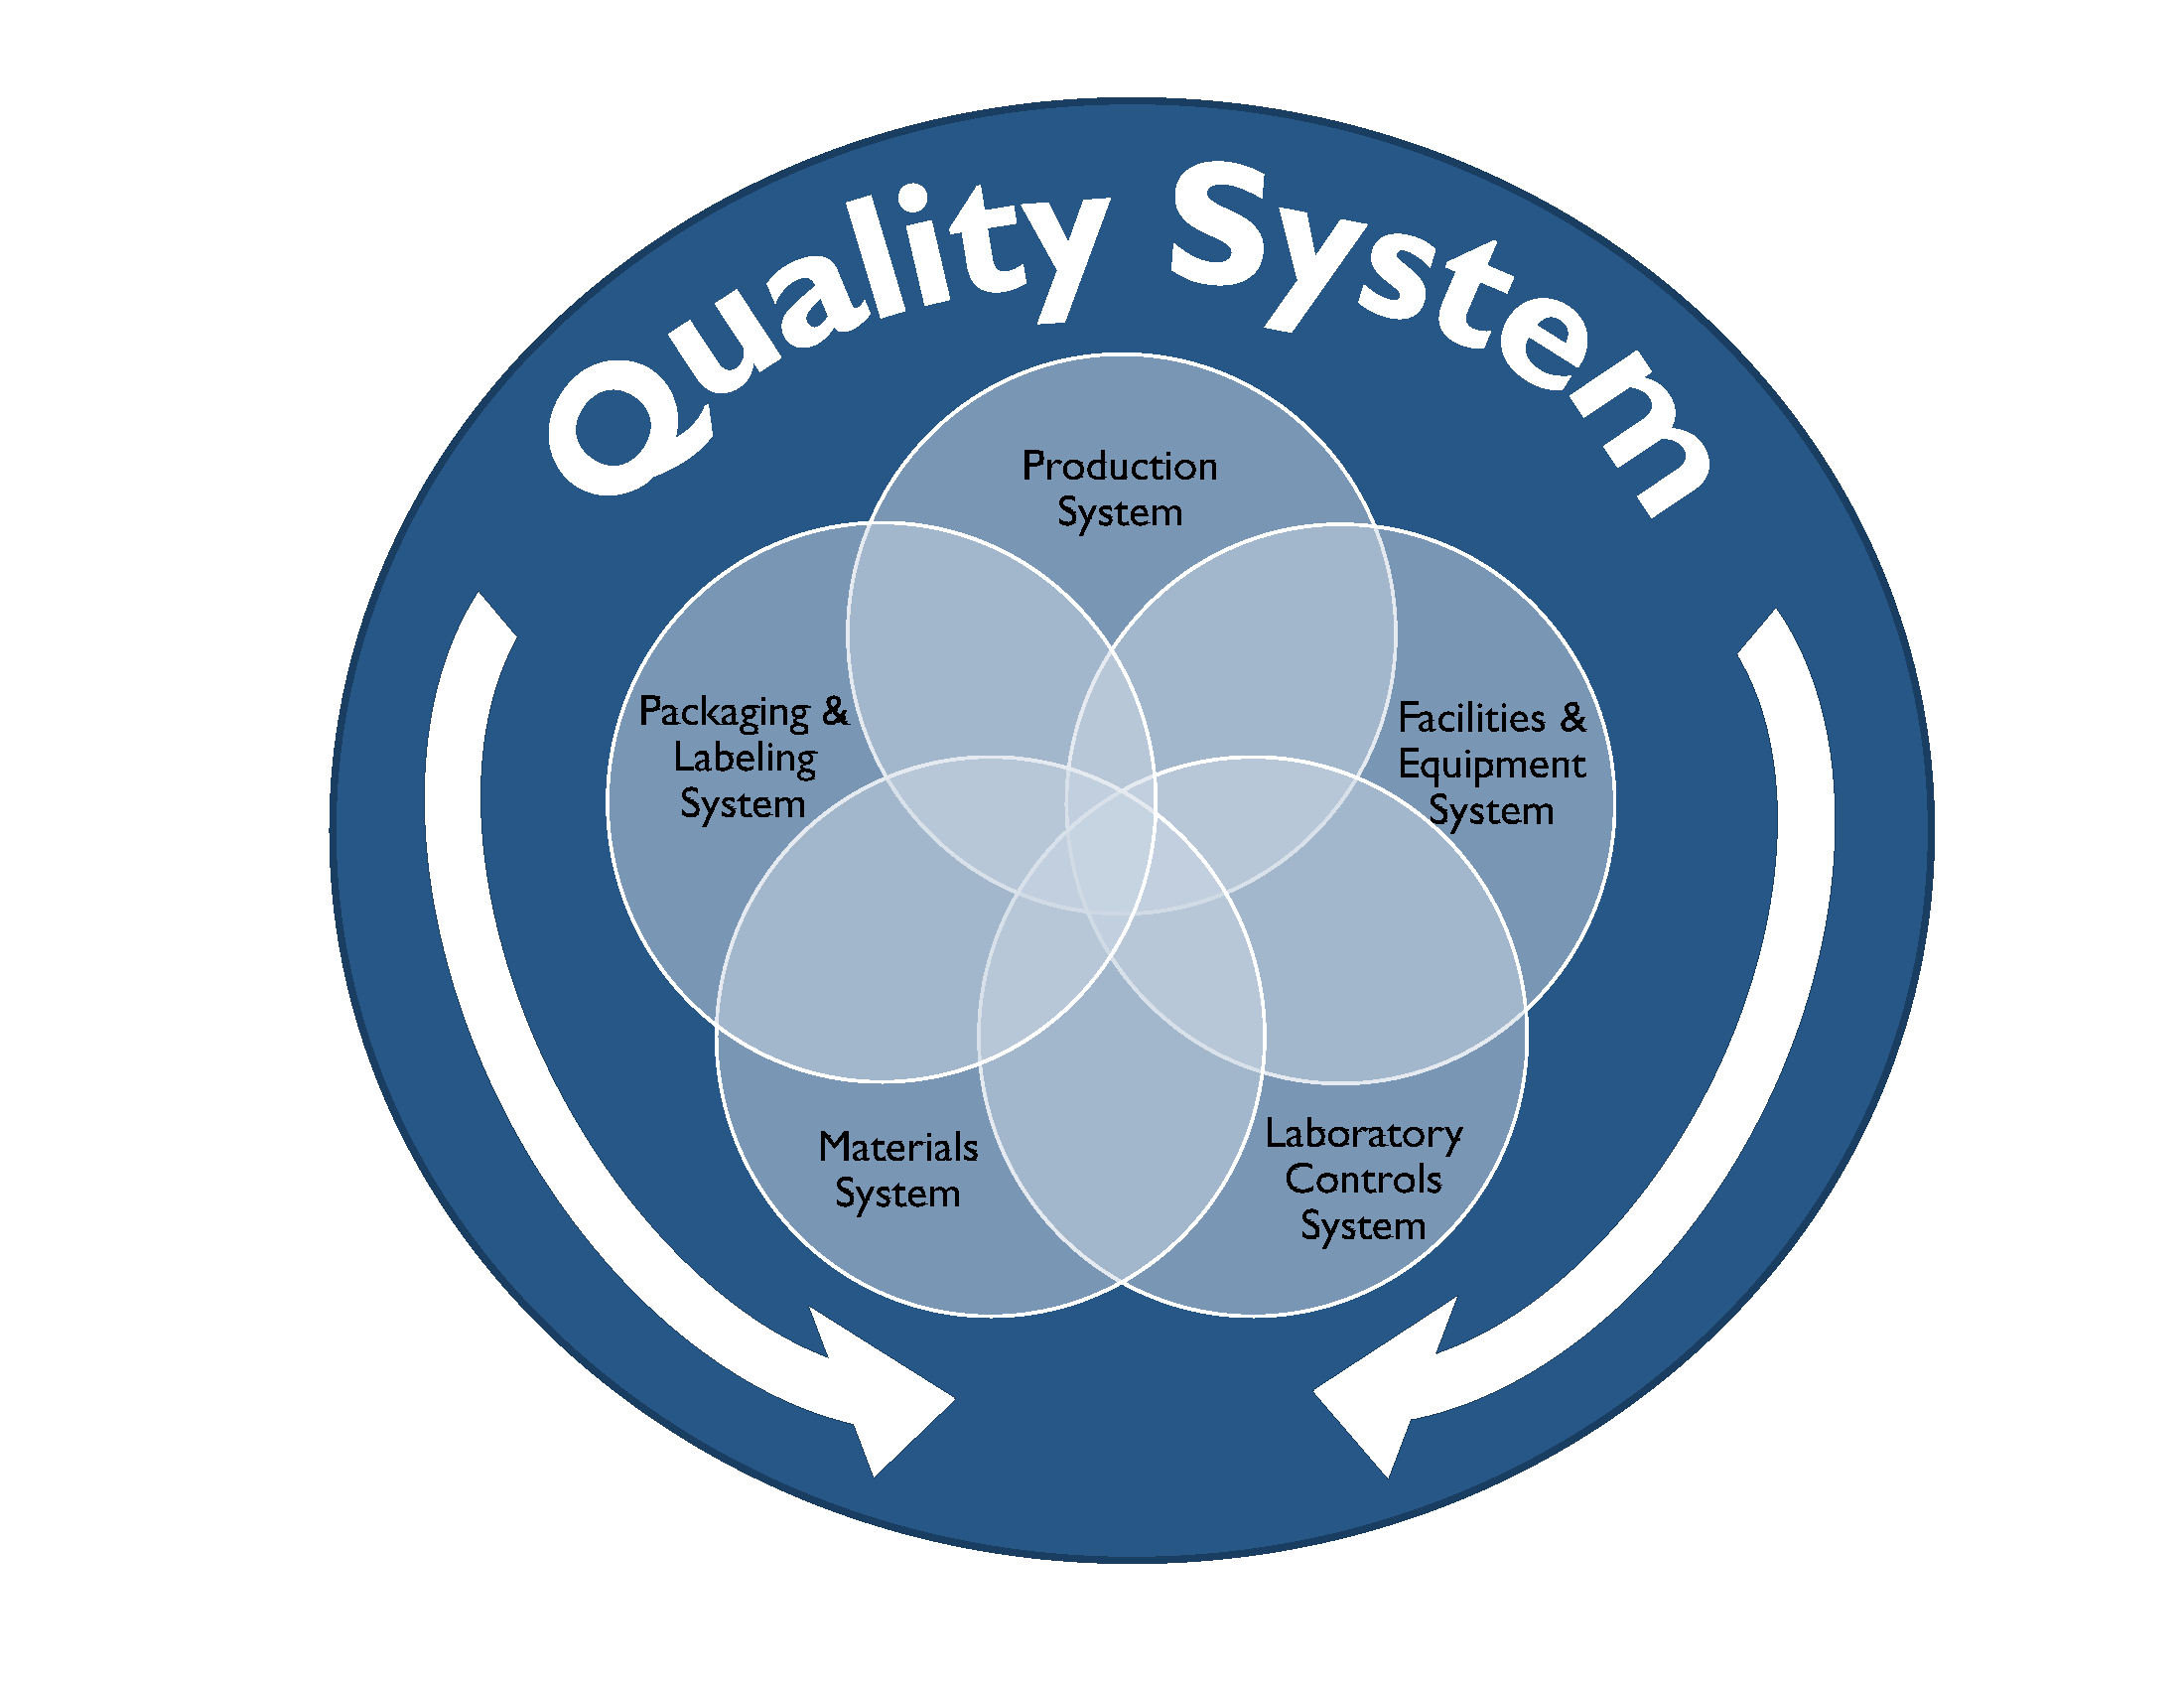 Quality System Illustration with functional areas